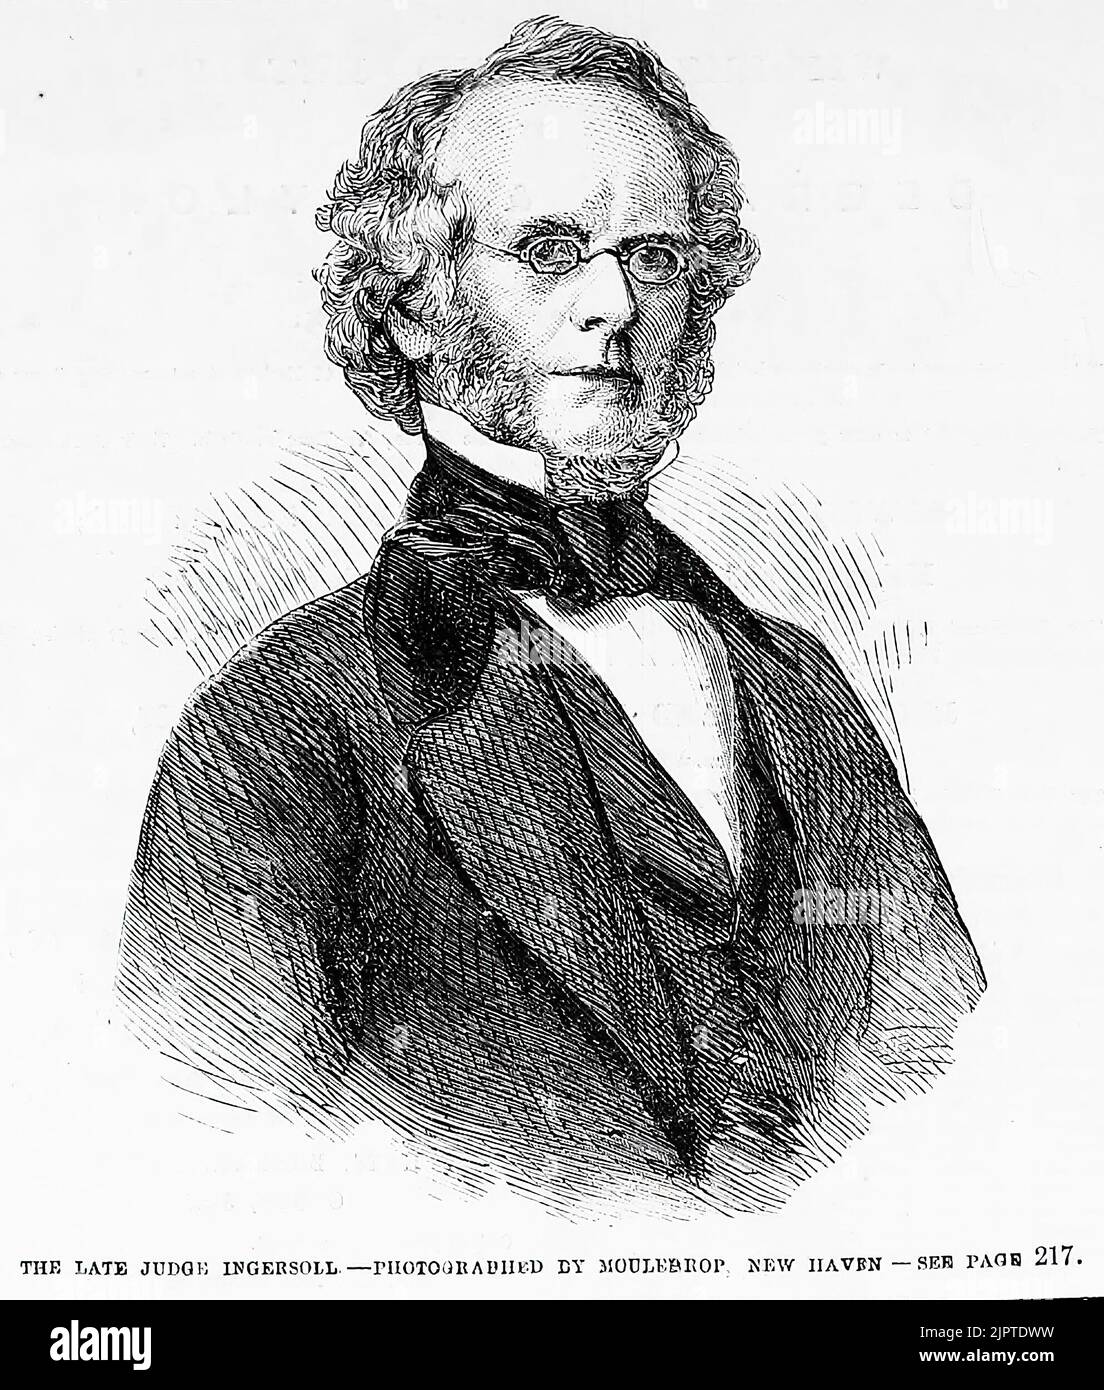 Portrait of the late Judge Charles Anthony Ingersoll (1860). 19th century illustration from Frank Leslie's Illustrated Newspaper Stock Photo